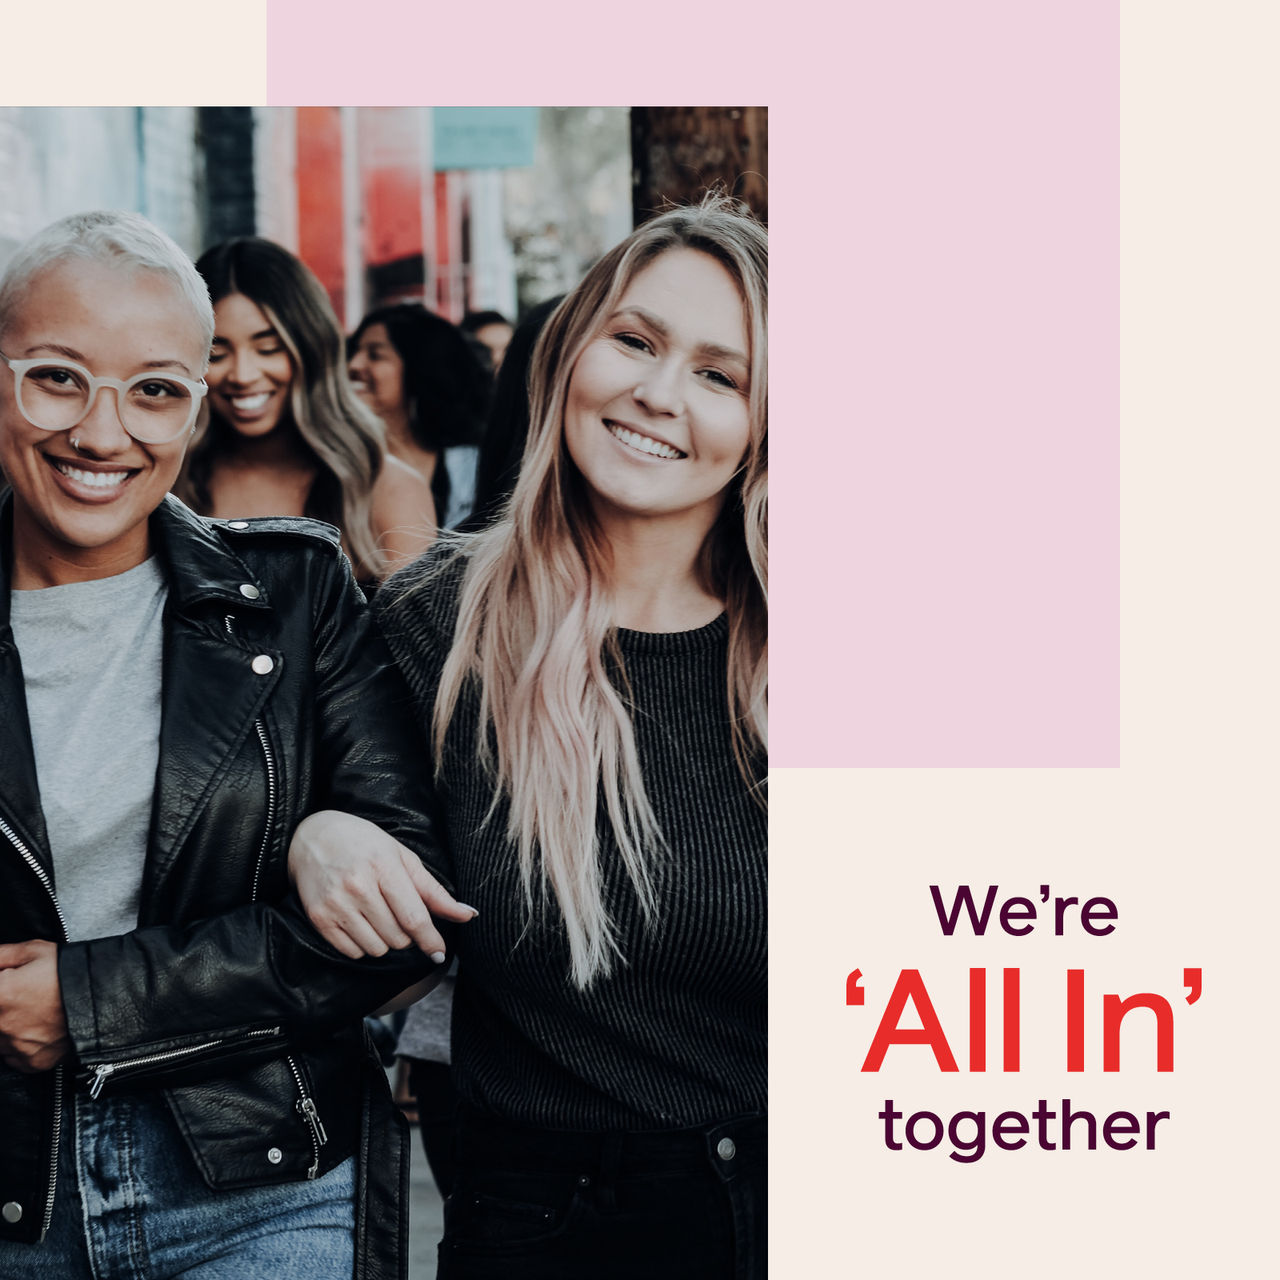 Two young women smiling, arms linked, with overlay text "we're 'All In' together"